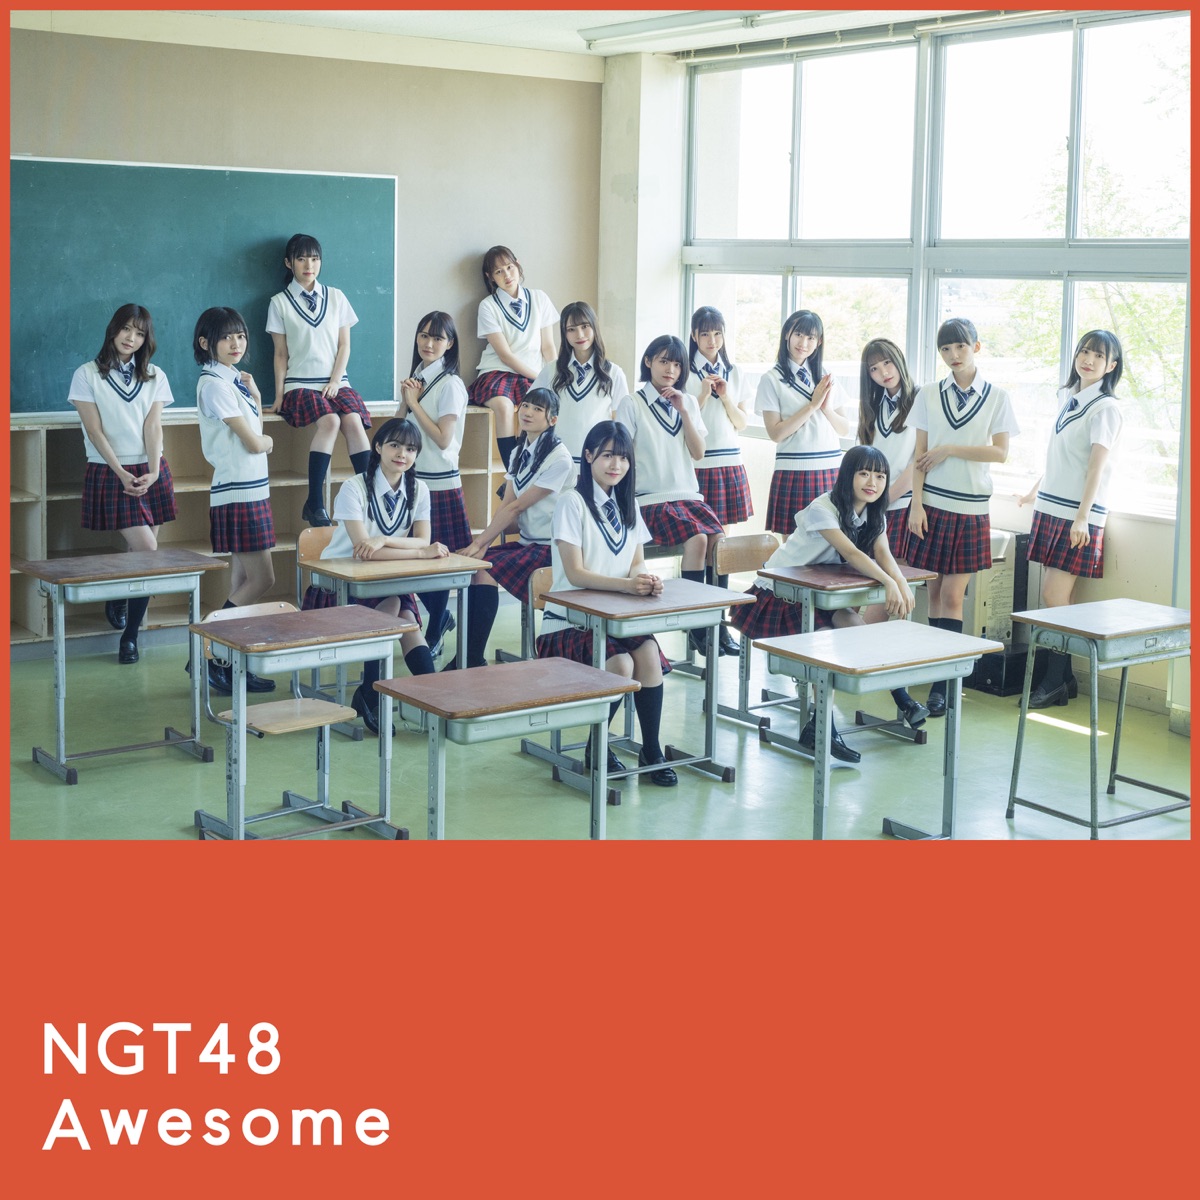 『NGT48 - Awesome 歌詞』収録の『Awesome』ジャケット